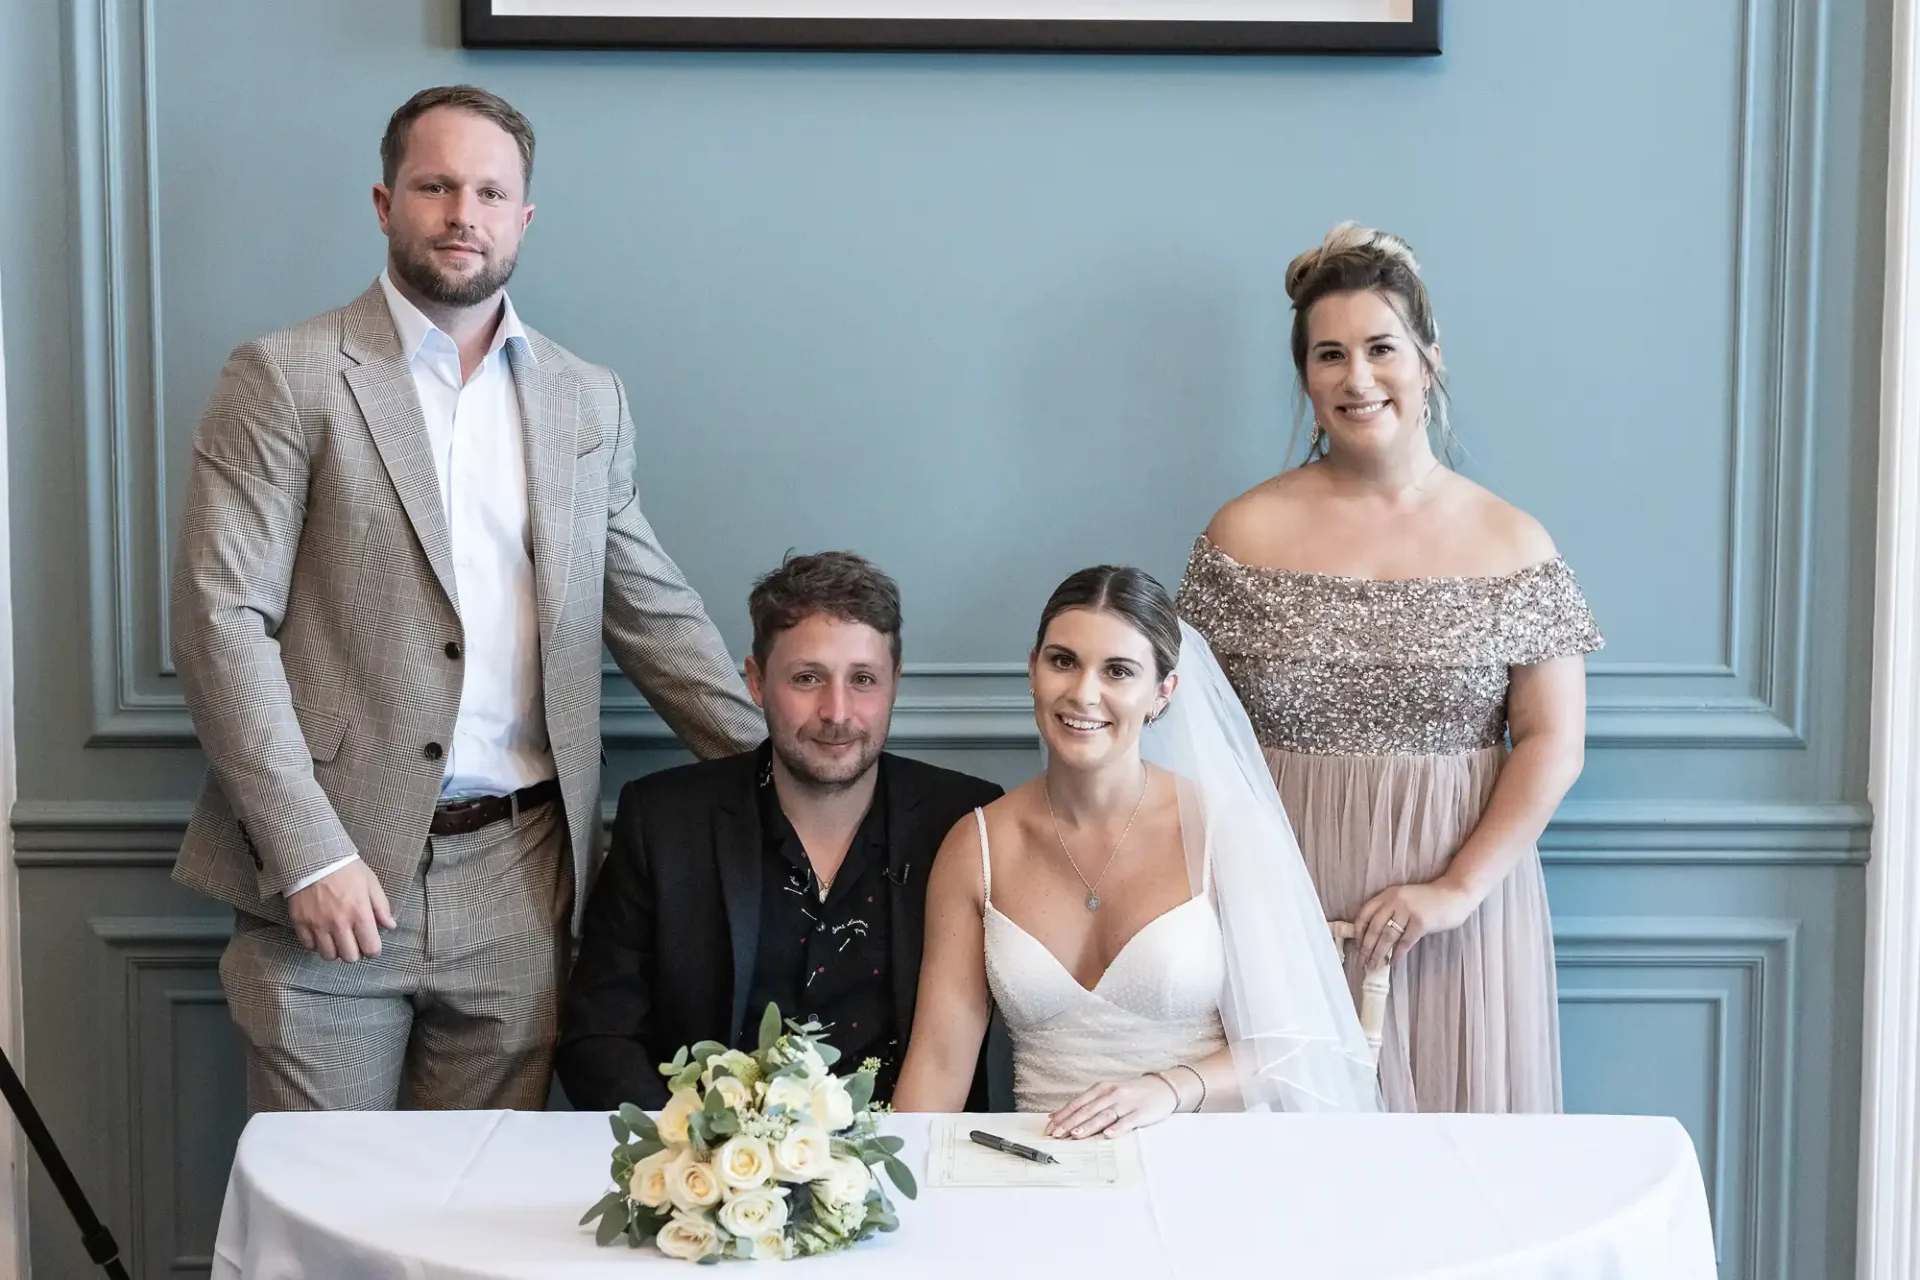 A bride and groom seated at a signing table, flanked by a best man and a bridesmaid, in a room with light blue walls.